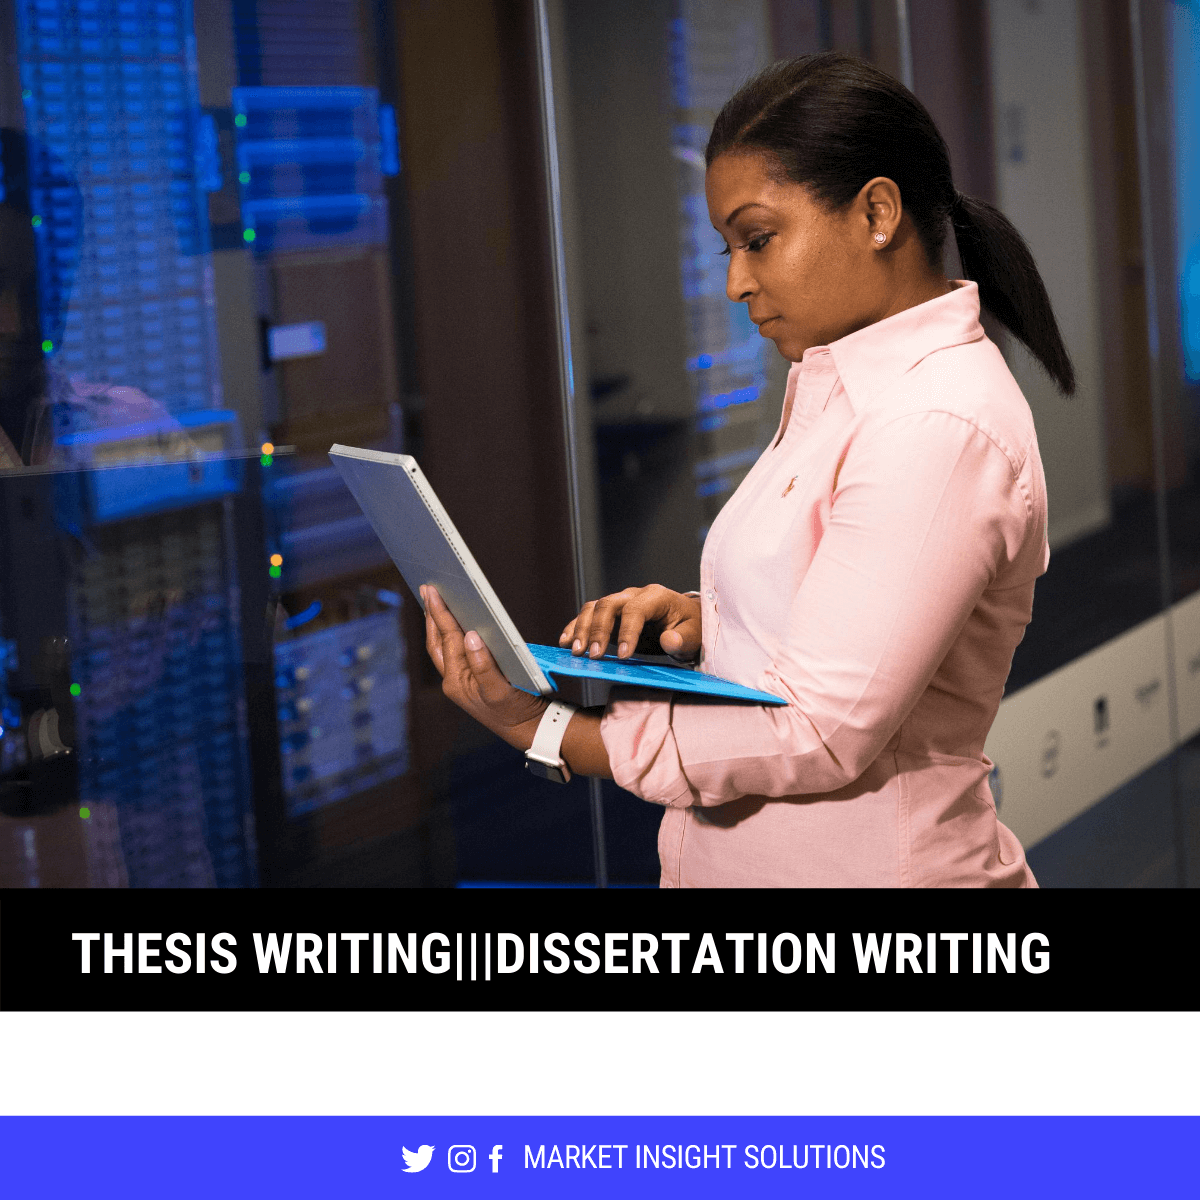 What Is The Difference Between Thesis Writing & Dissertation Writing?